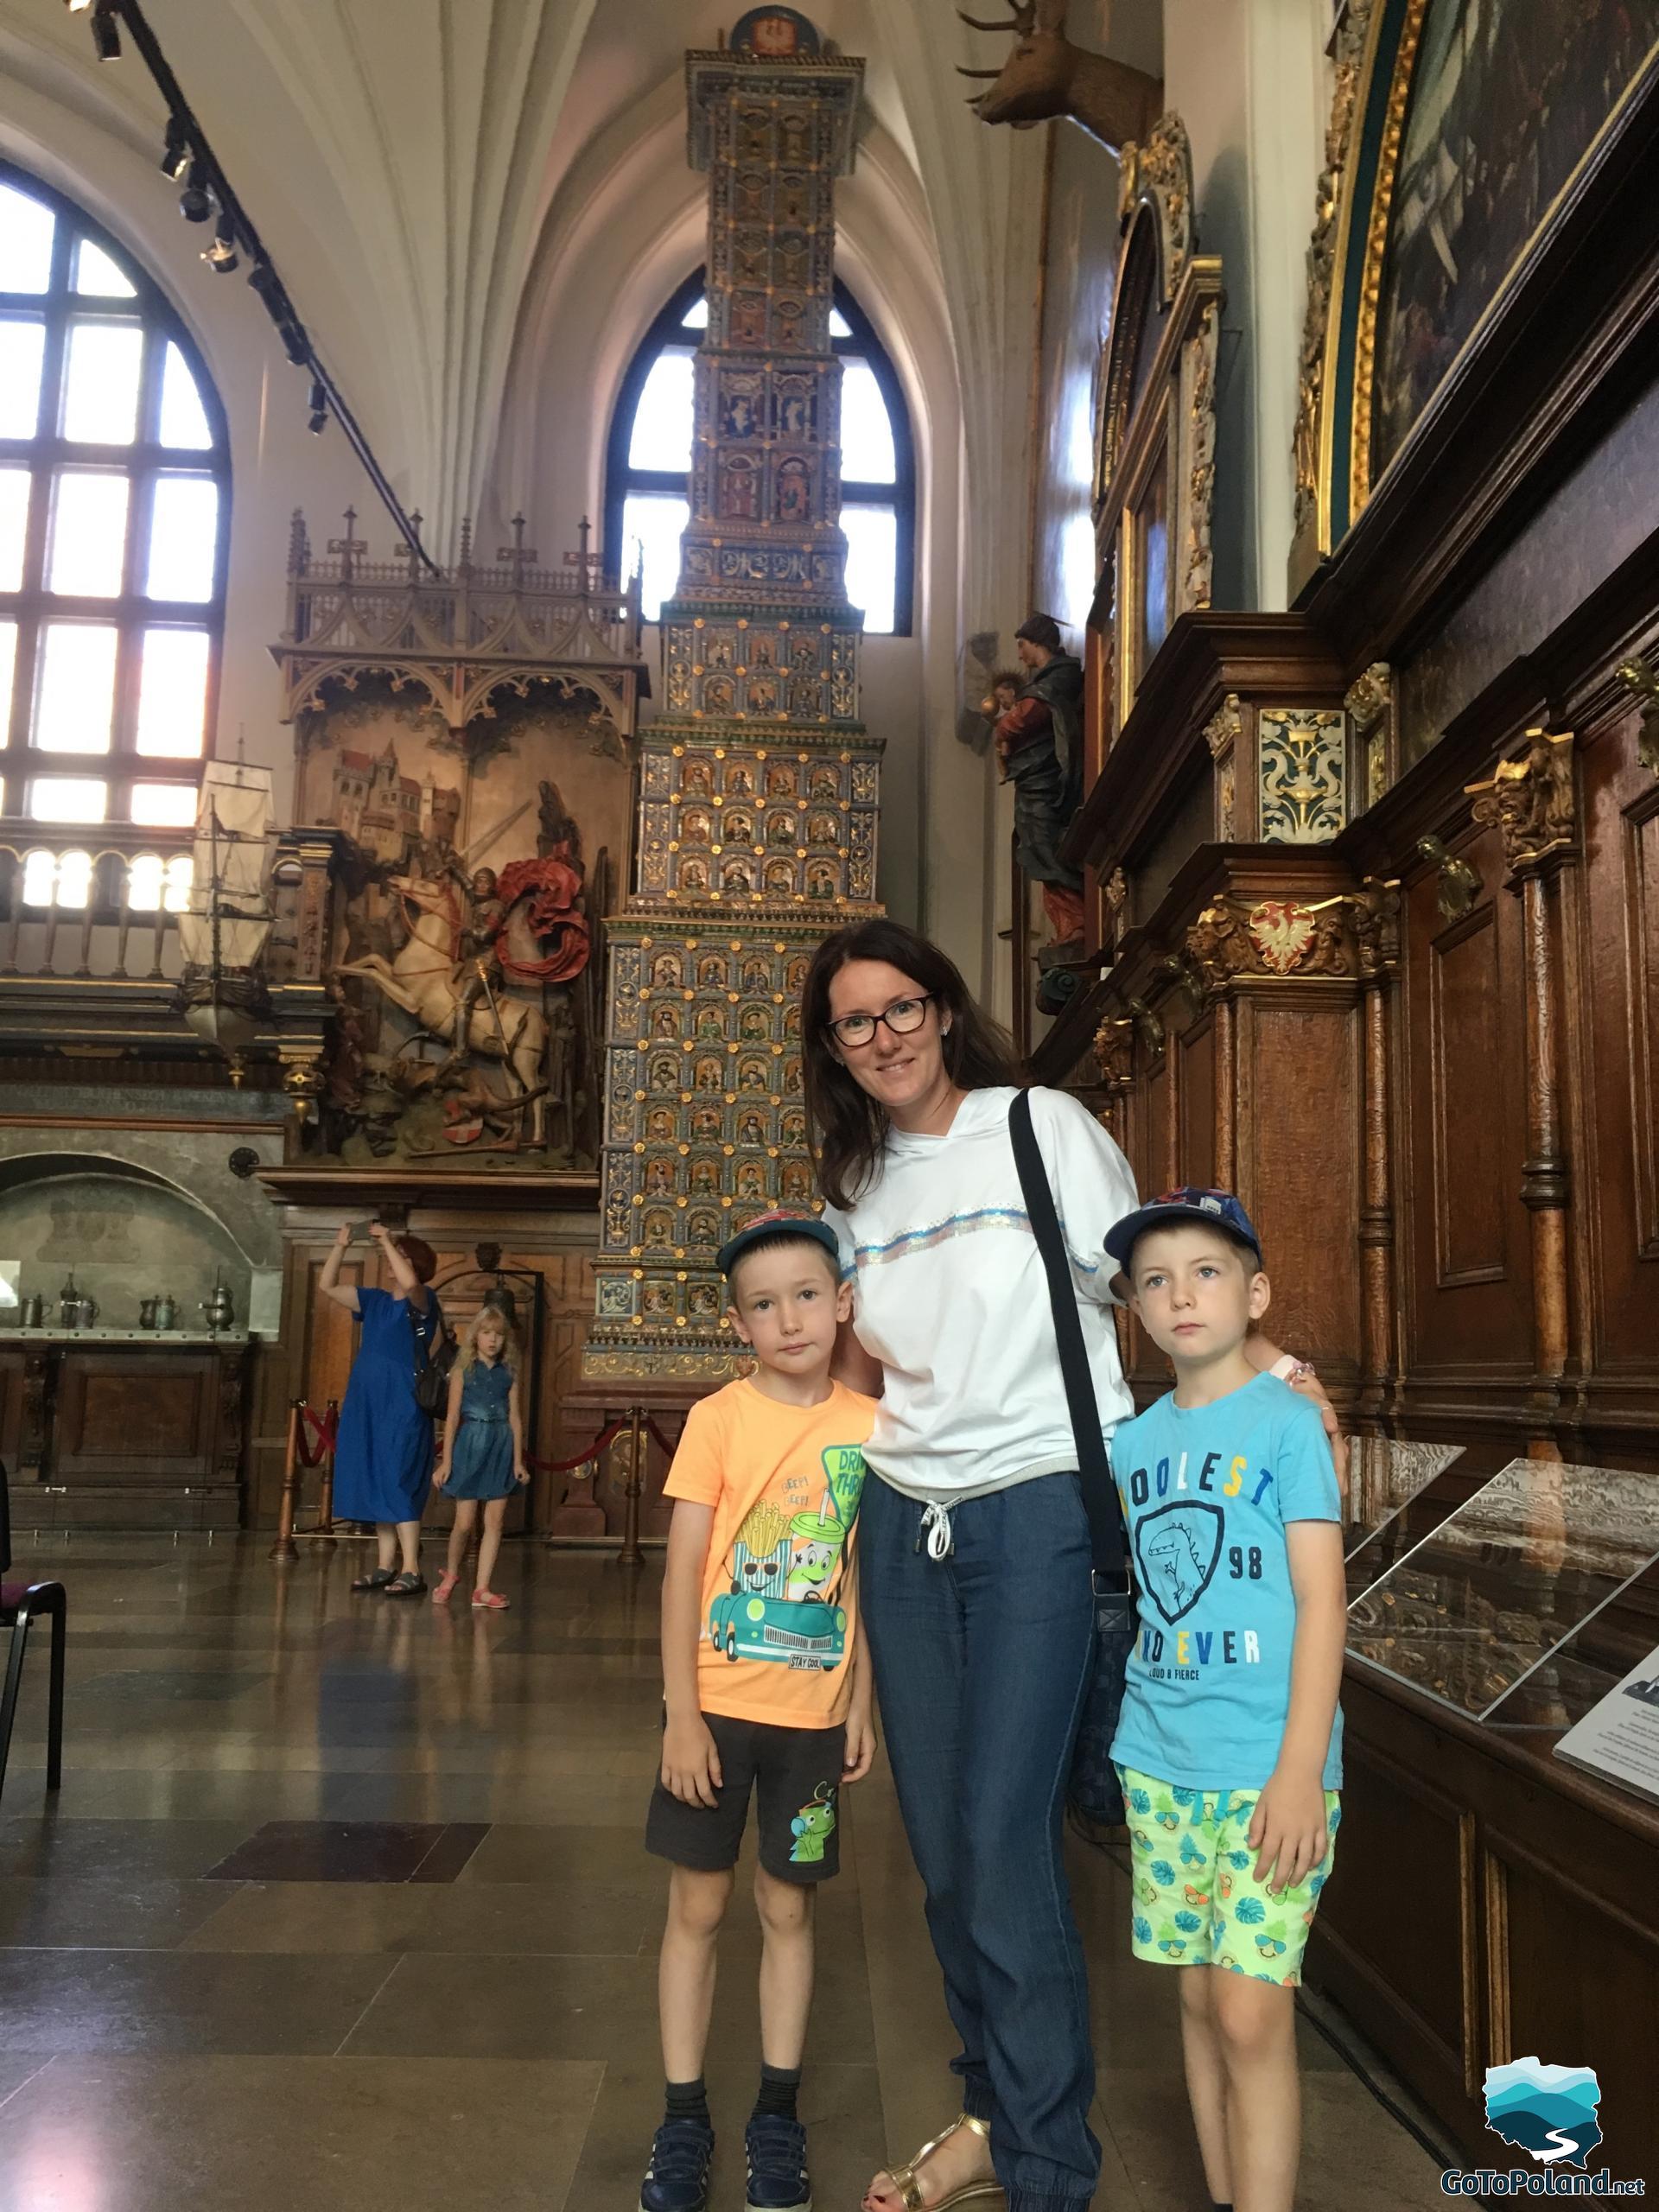 a woman and two boys are in a very decorative hall, there is a tiled stove behind them